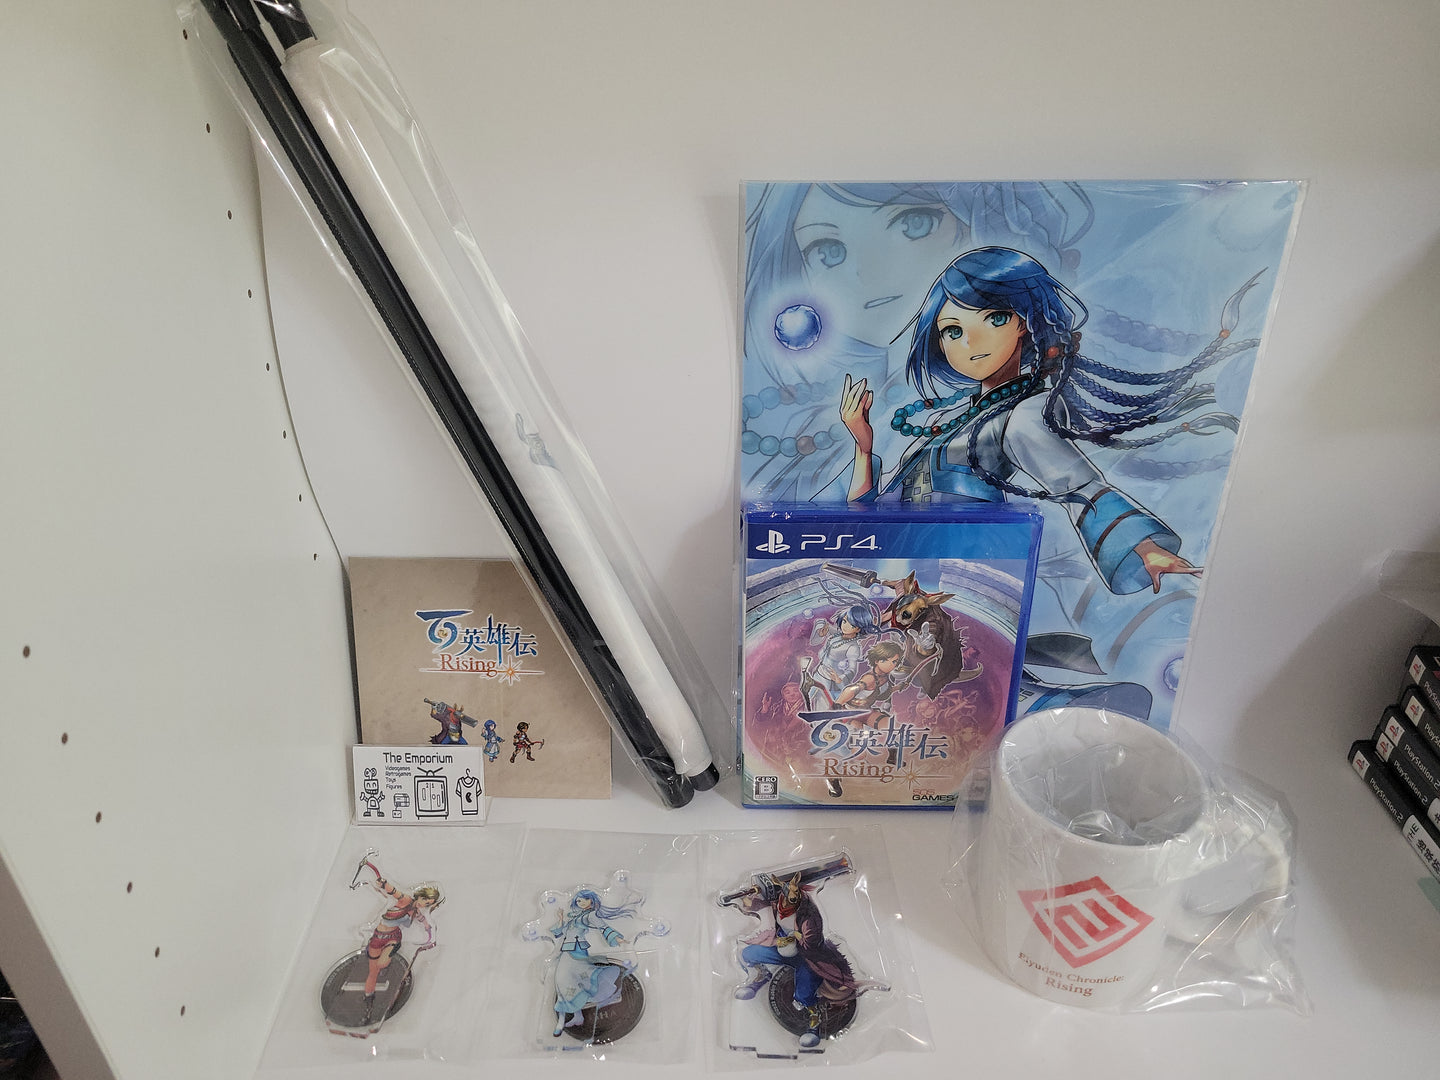 Eiyuden Chronicle: Rising Deluxe first print limited- Sony PS4 Playstation 4